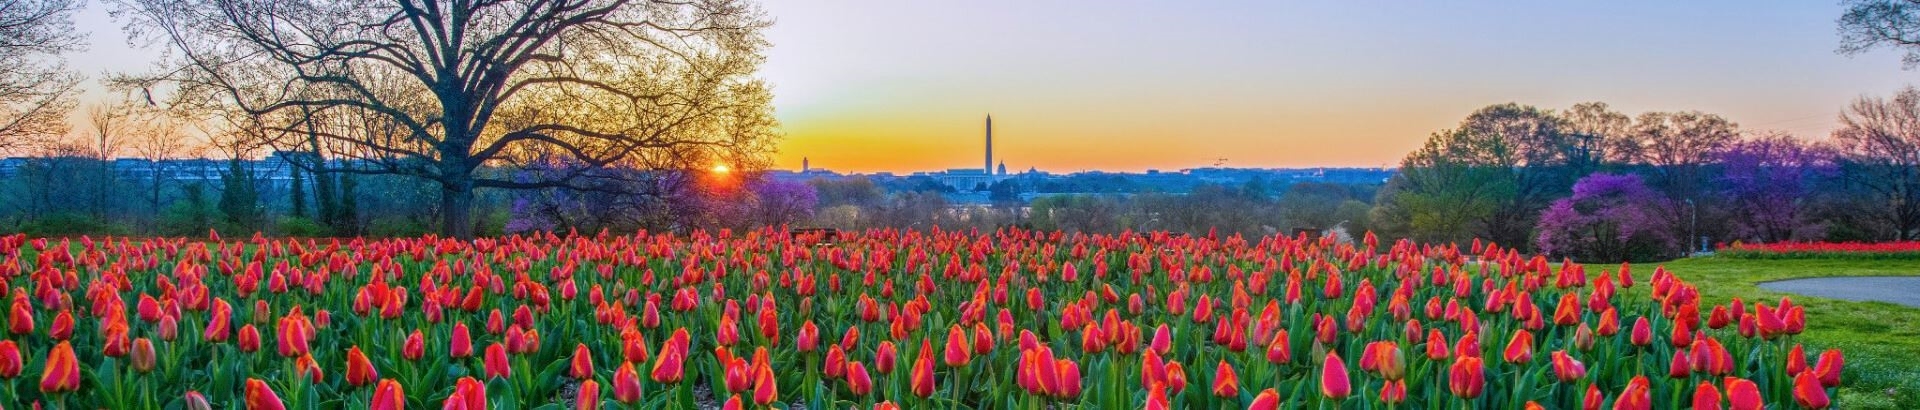 Standing near the Iwo Jima Memorial and Arlington National Cemeter, the Netherlands Carillon has one of the best views in the area, overlooking the Potomac River towards Washington, D.C..